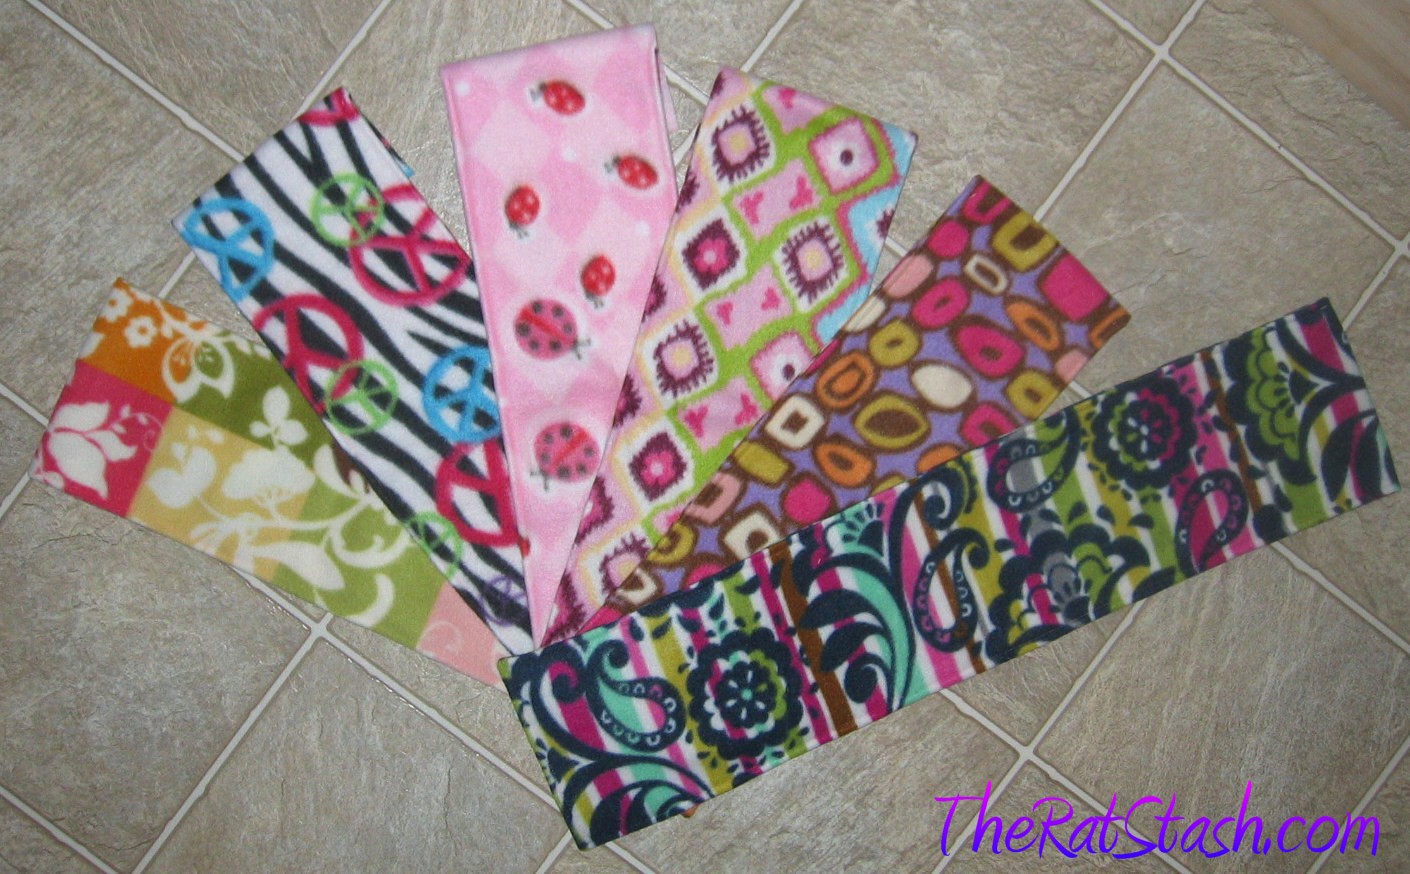 For Katrina: 5 FN/CN Ramp Covers & 1 External Ramp Cover in "bright surprise" fabrics